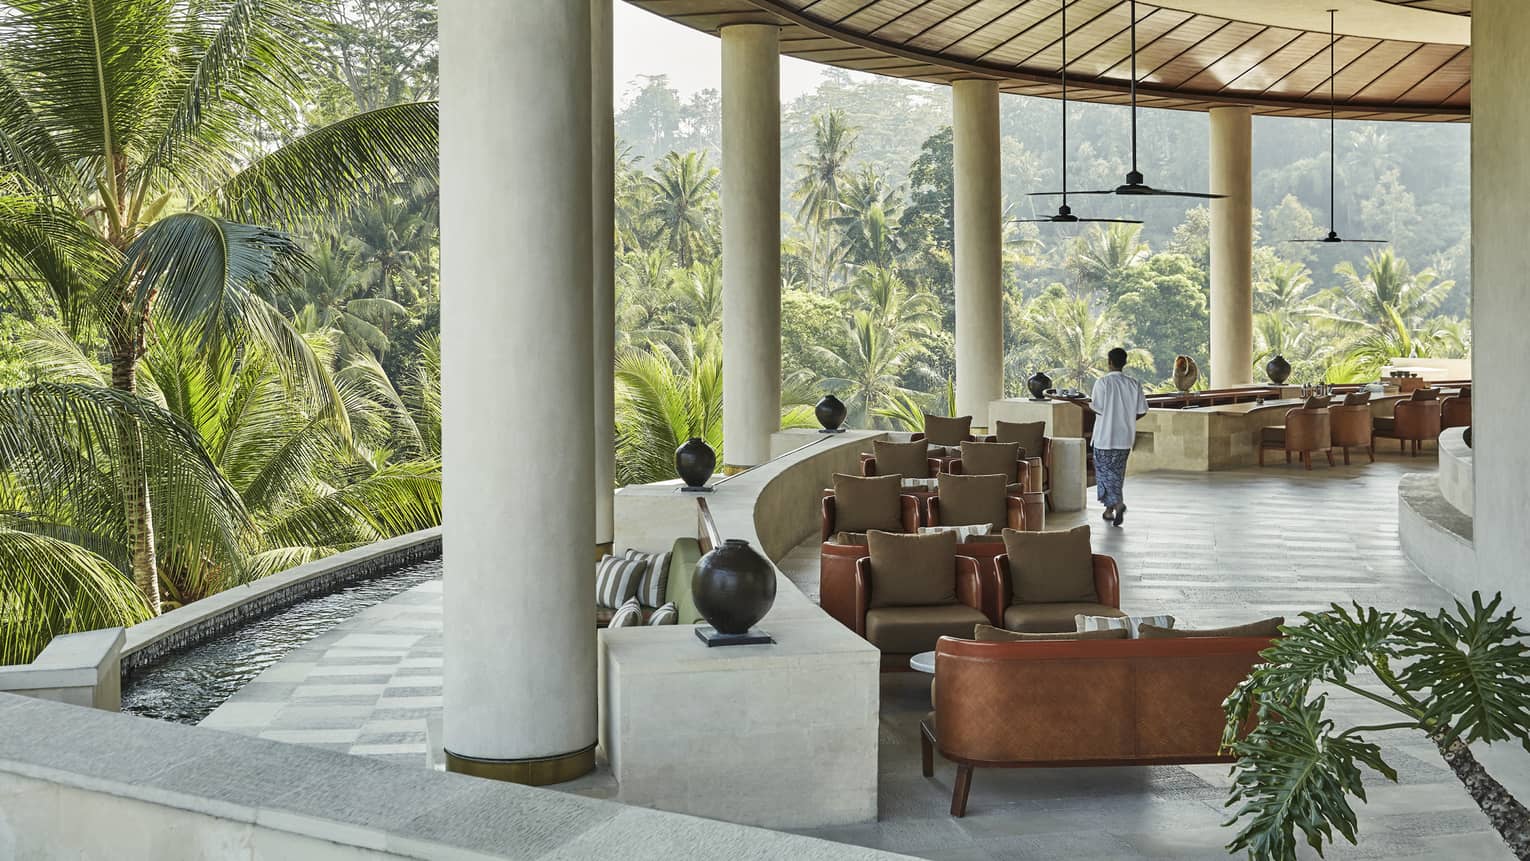 The lobby of the Four Seasons hotel in Bali, overlooking a vast forest